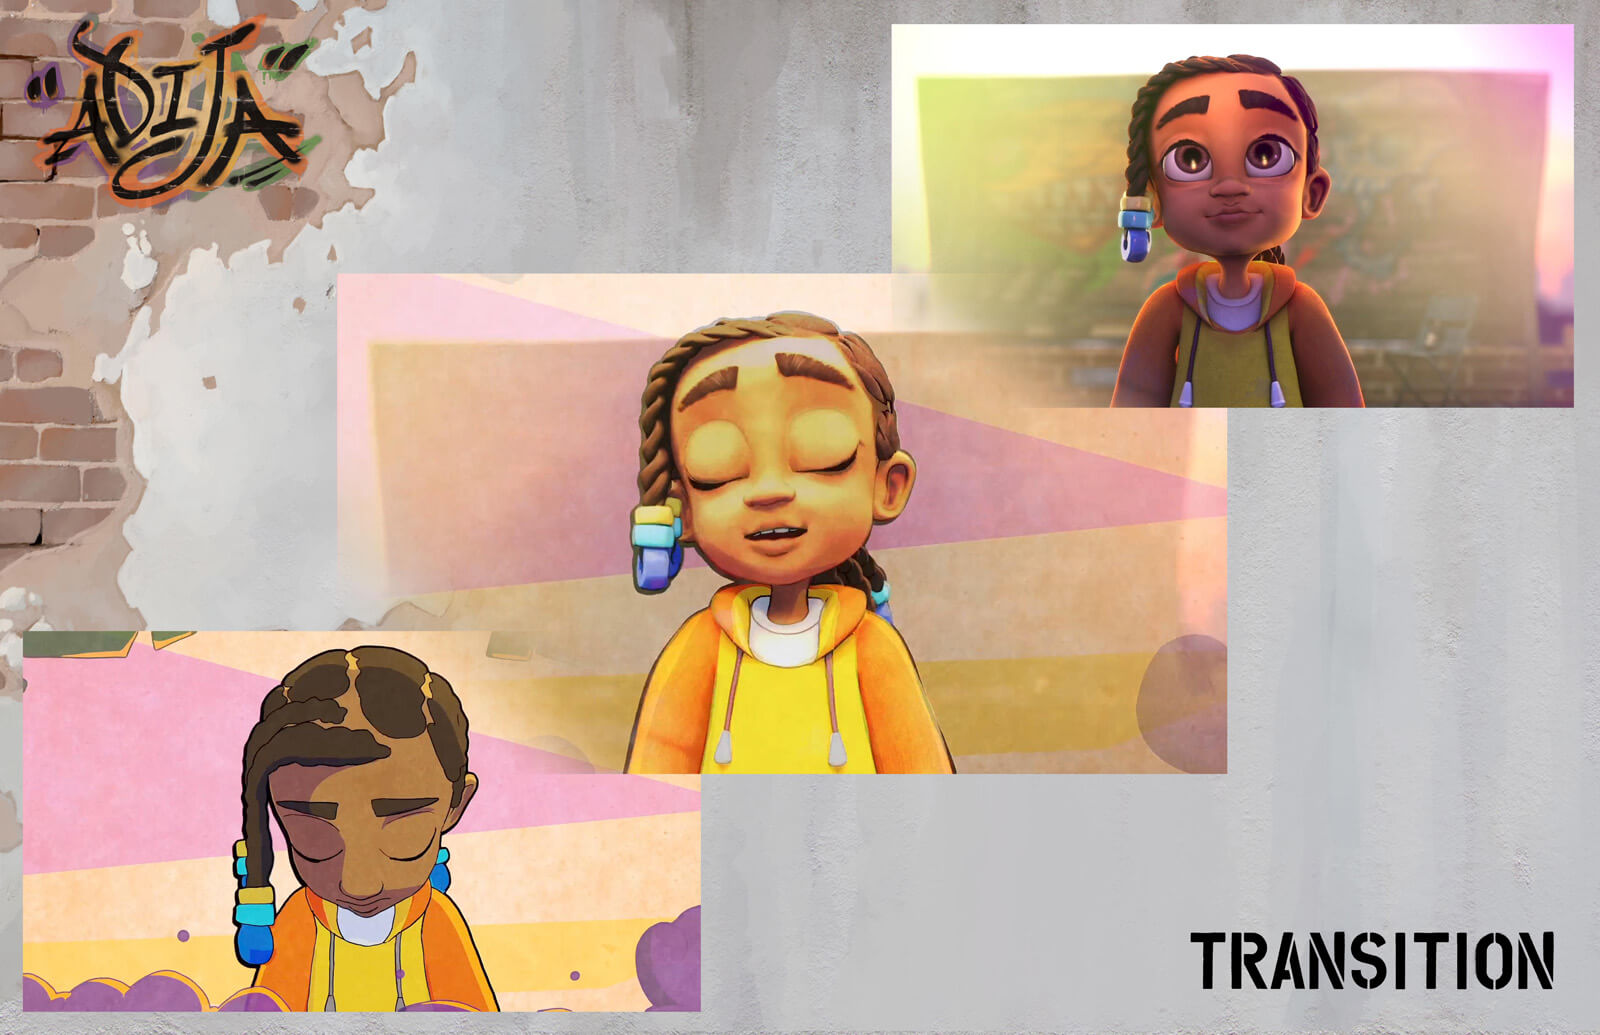 Presentation slide depicting the transition between 2D and 3D animation in the film Adija